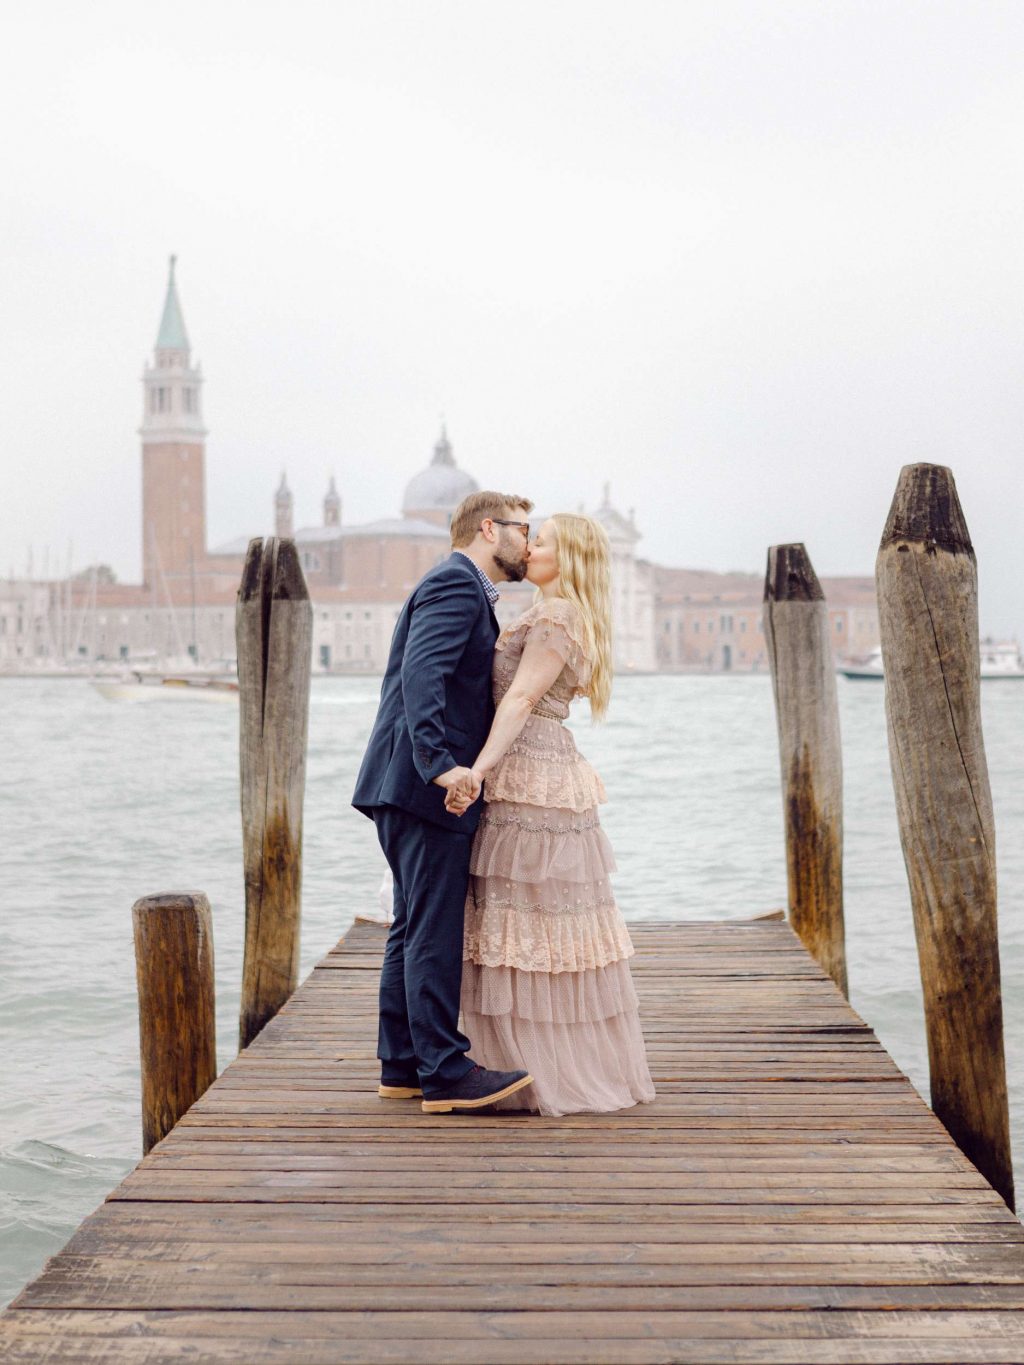 Elope to Italy | Camilla M Wedding Photographer in Venice Italy Luxury Elopement